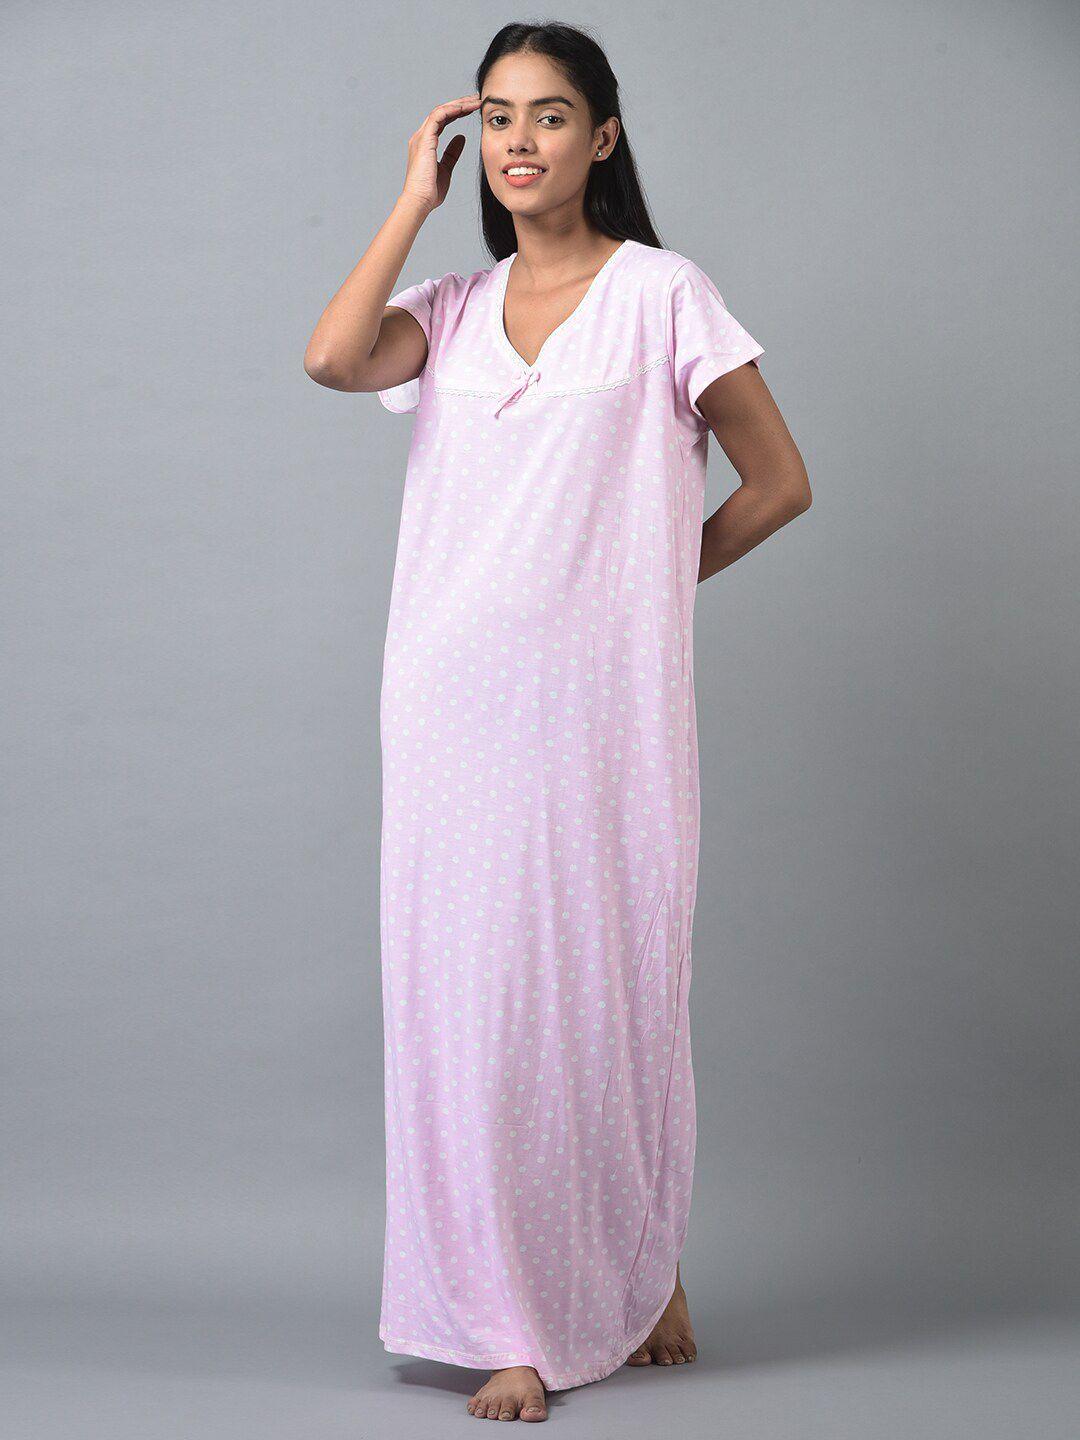 noty polka dots printed v-neck knotted maxi nightdress